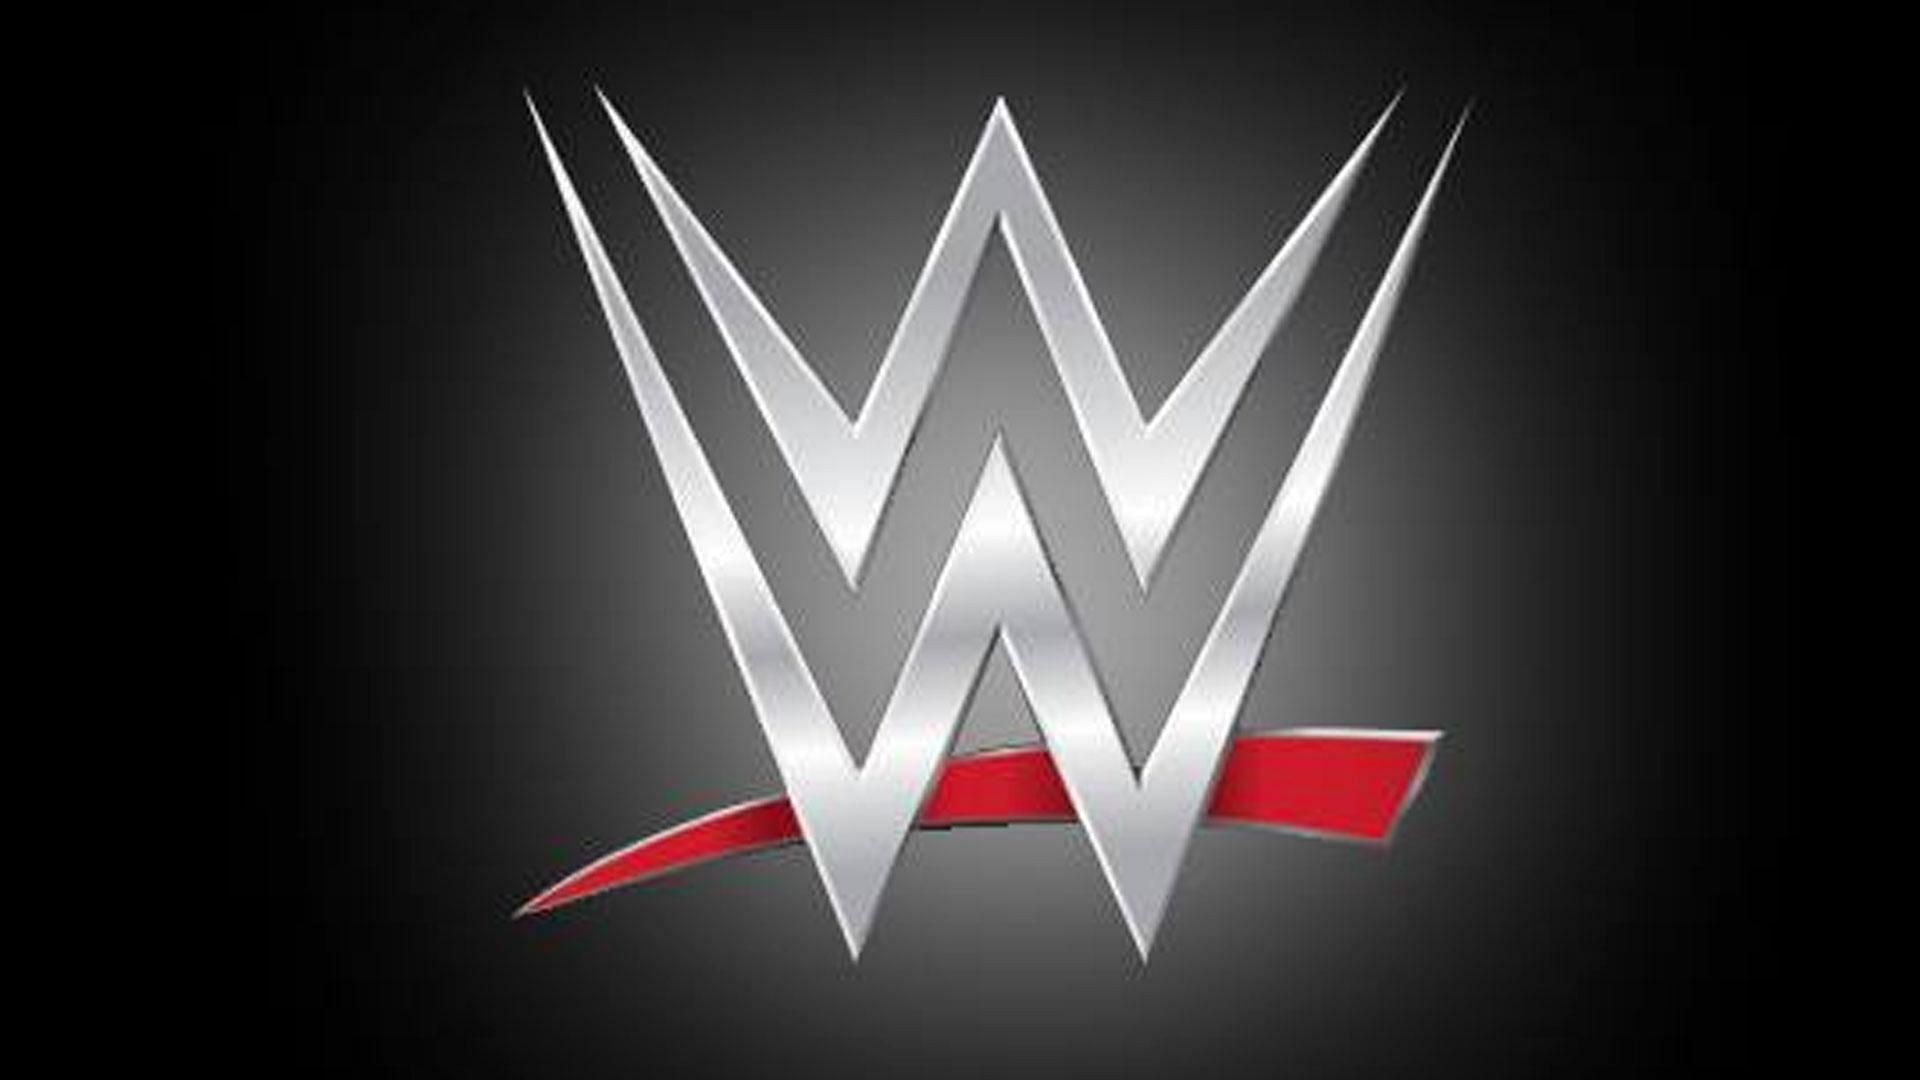 More WWE employees gone after over 100 lost their jobs in mass September layoffs